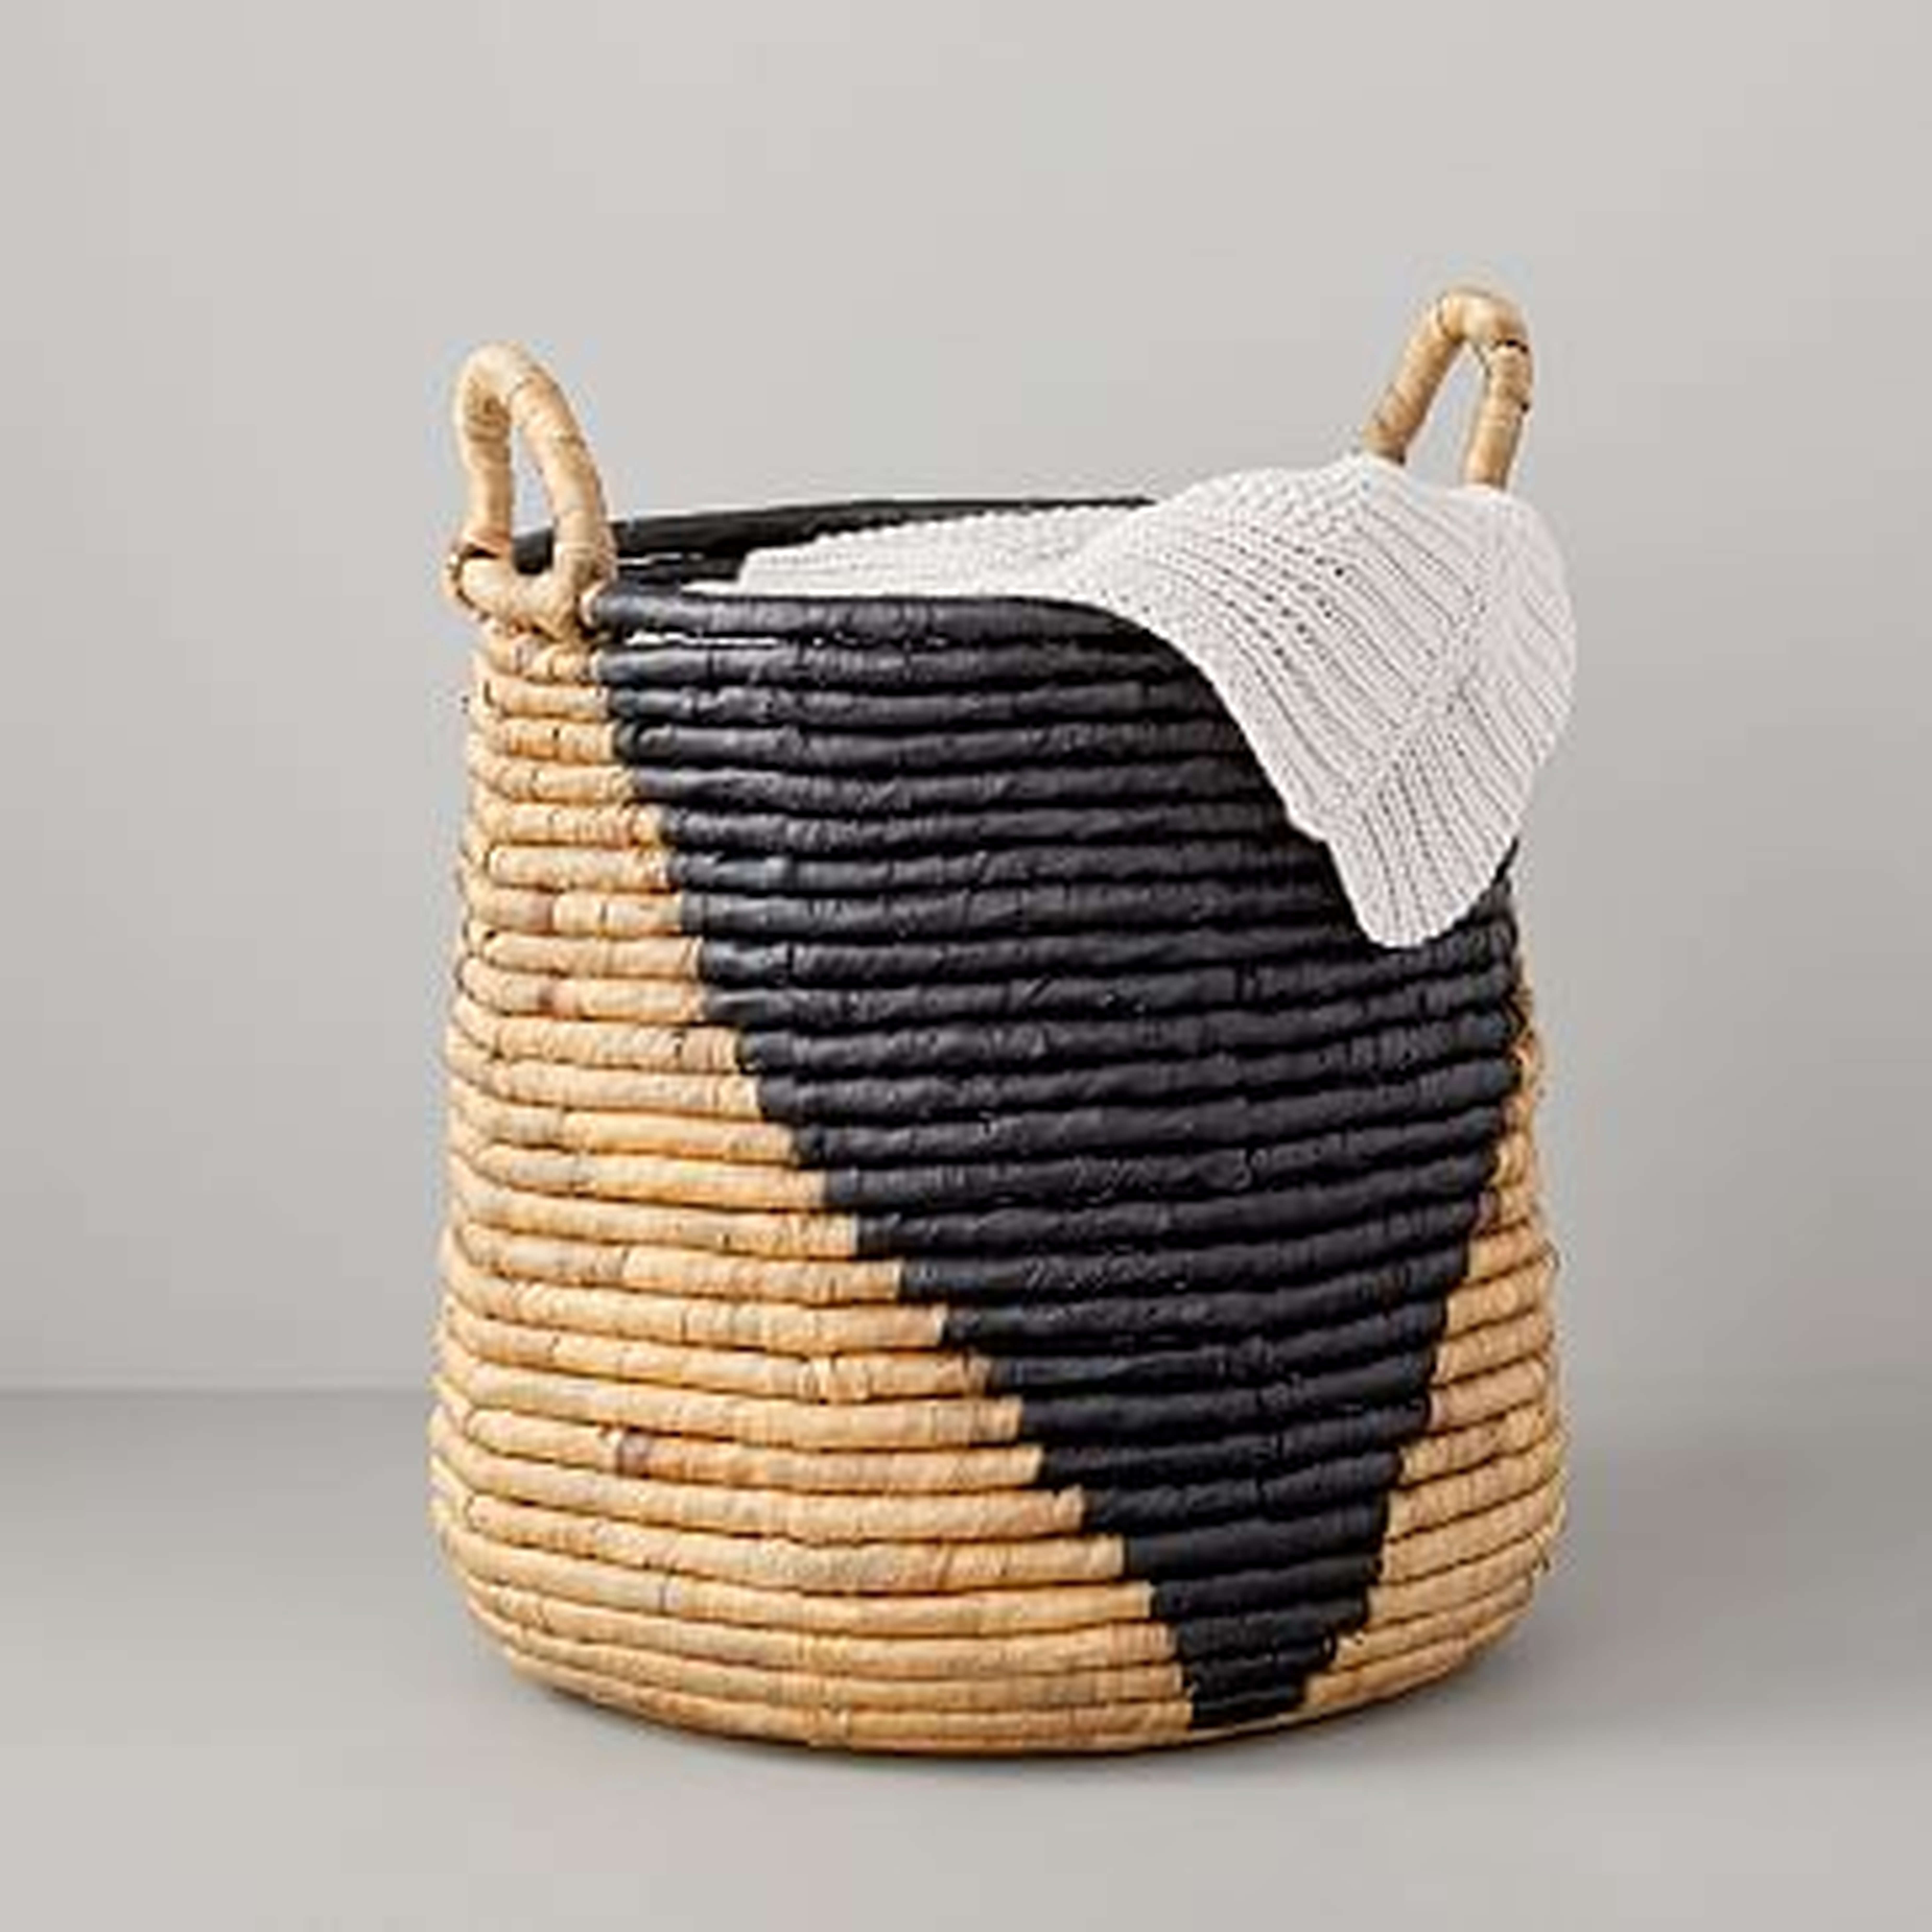 Woven Seagrass Basket is Tall Round in Natural/Black - West Elm